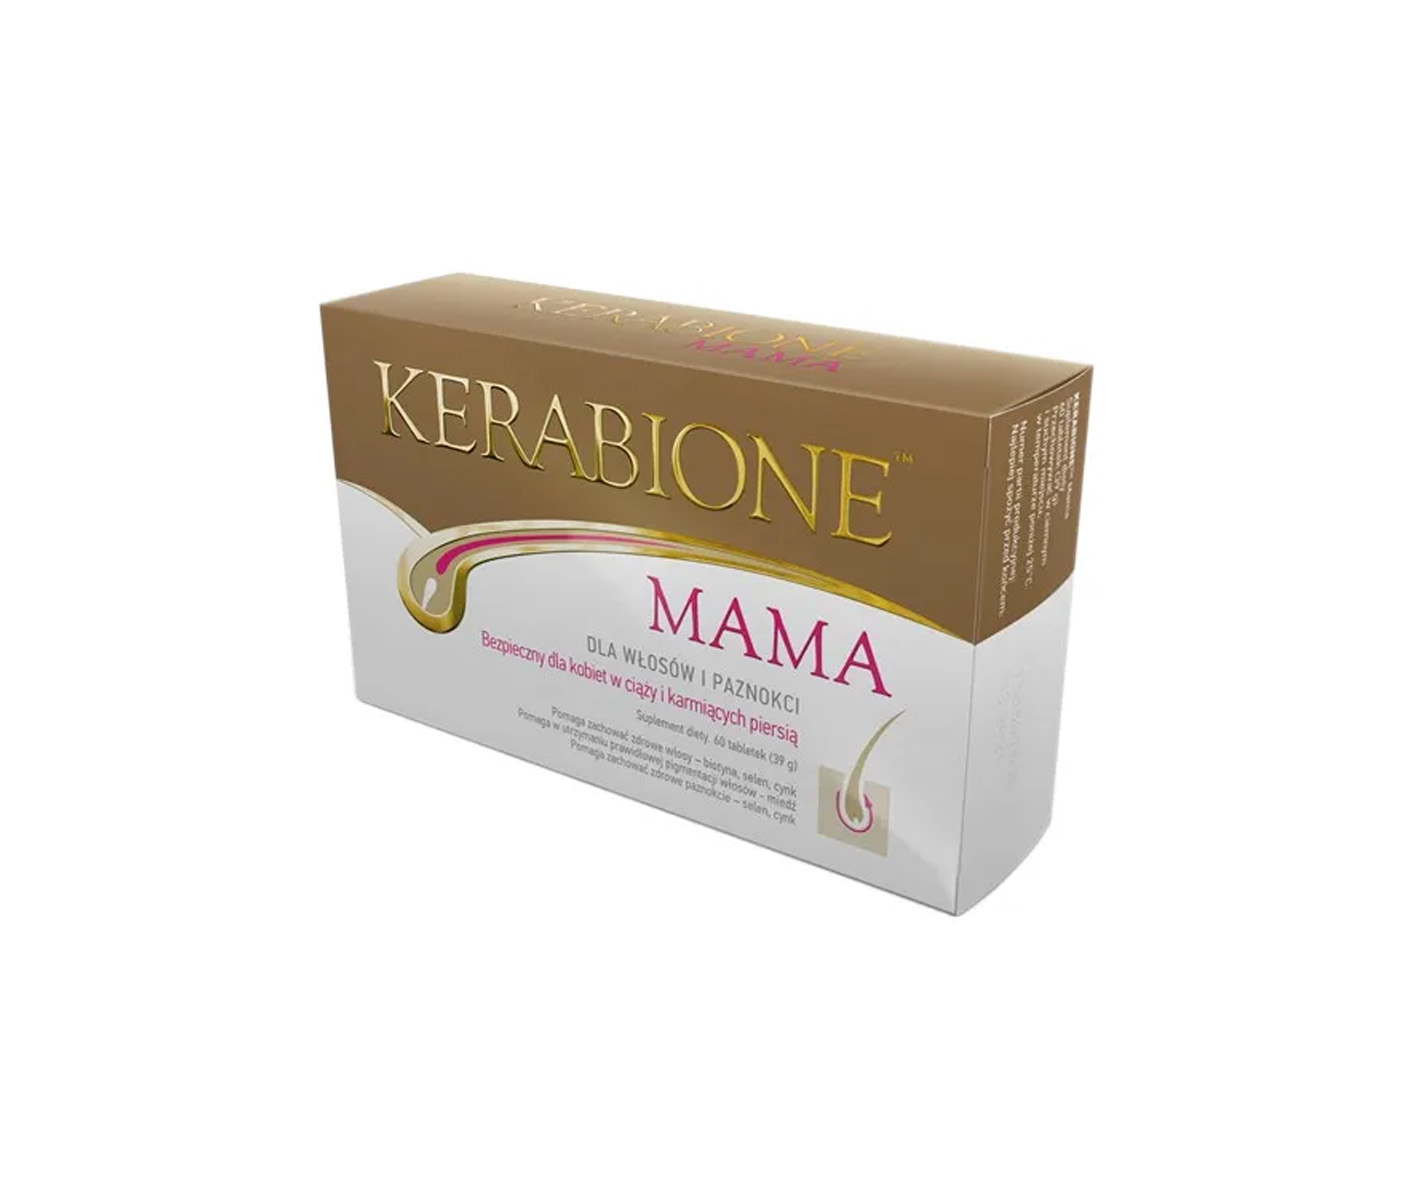 Kerabione Mama, dietary supplement for hair after pregnancy